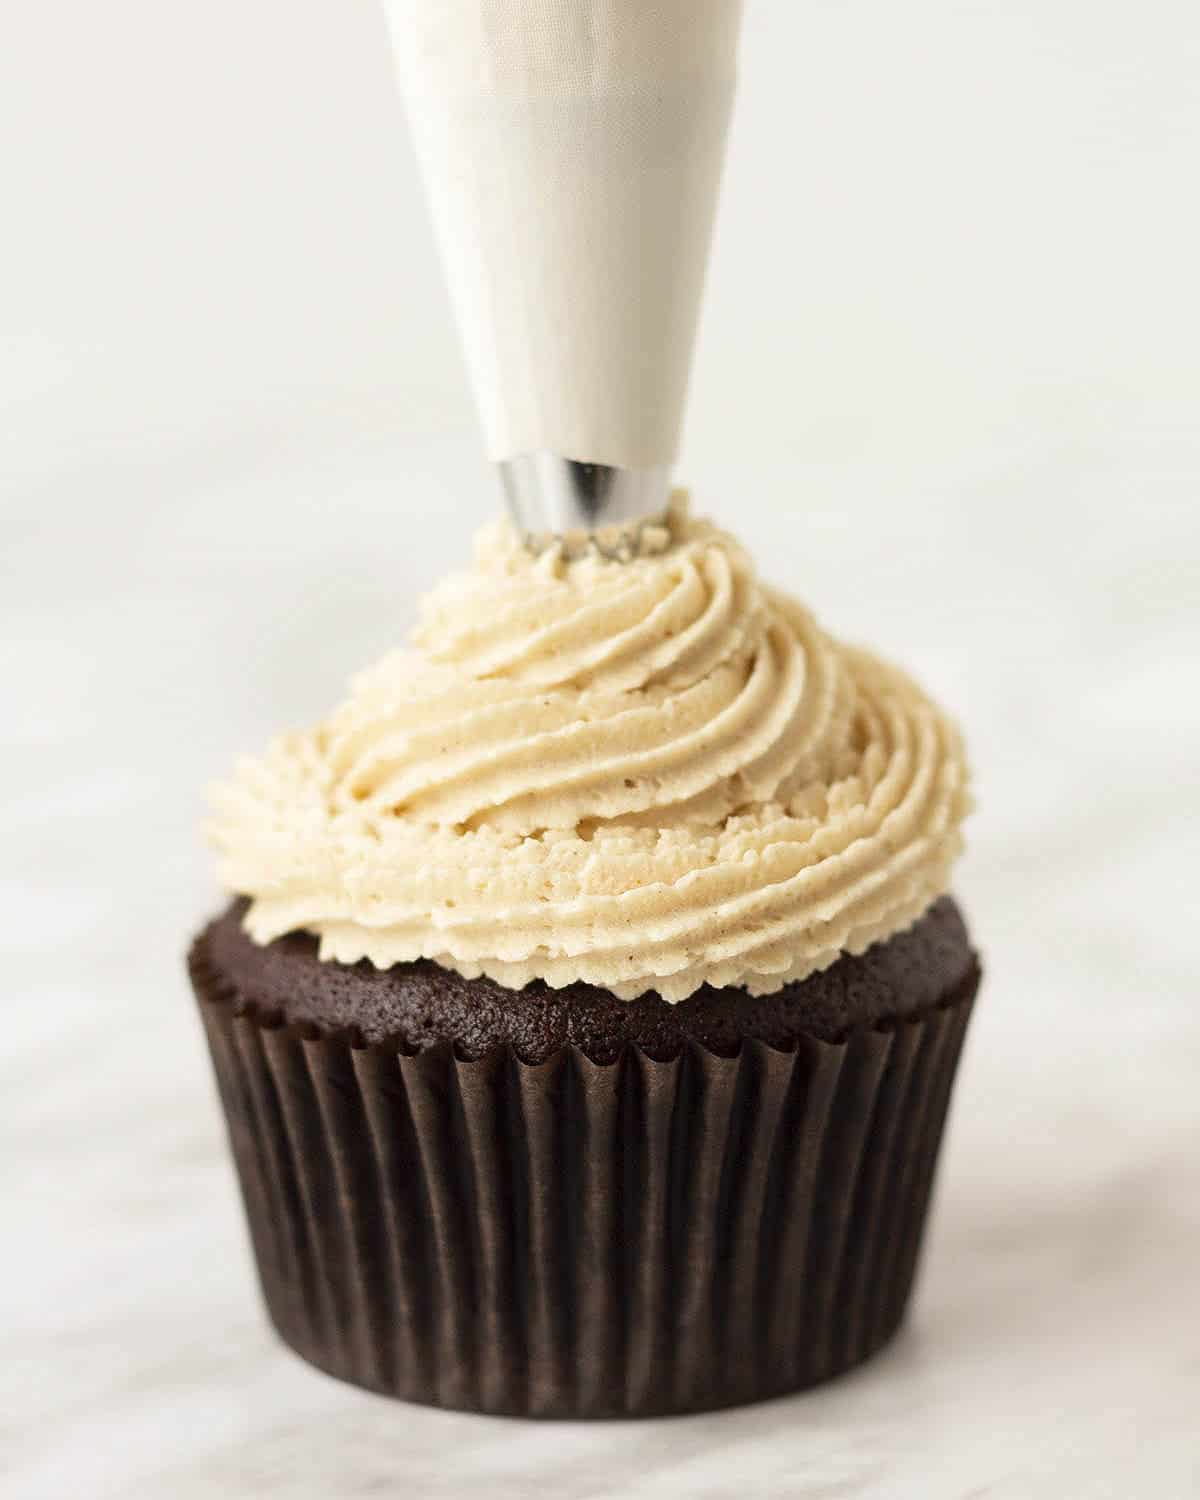 Dairy-free peanut butter icing being piped onto a chocolate cupcake.